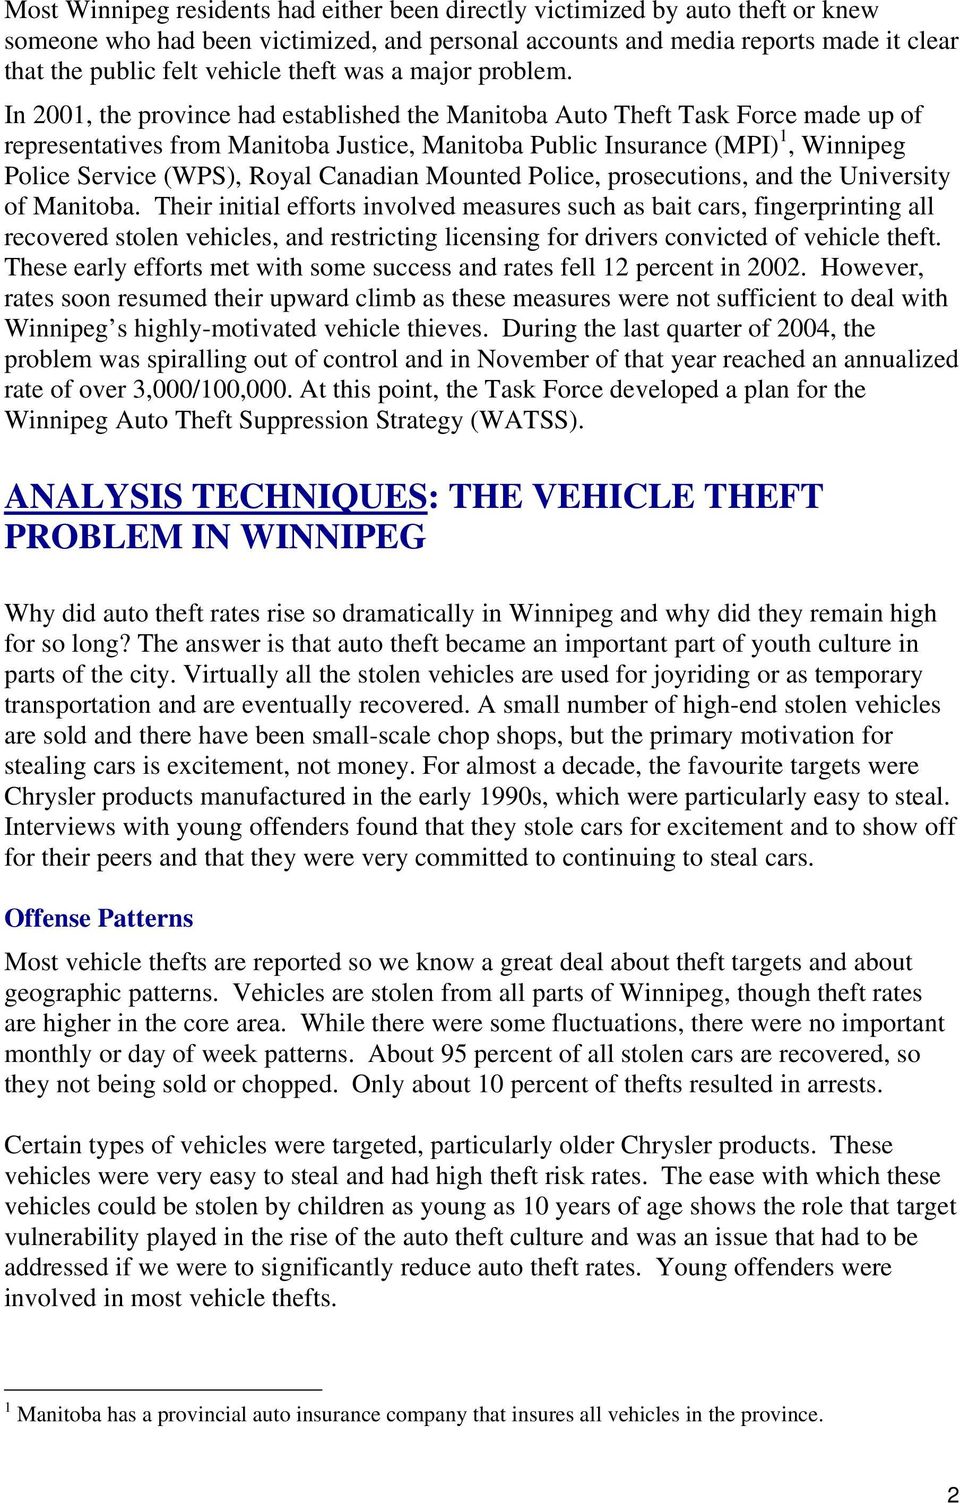 In 2001, the province had established the Manitoba Auto Theft Task Force made up of representatives from Manitoba Justice, Manitoba Public Insurance (MPI) 1, Winnipeg Police Service (WPS), Royal